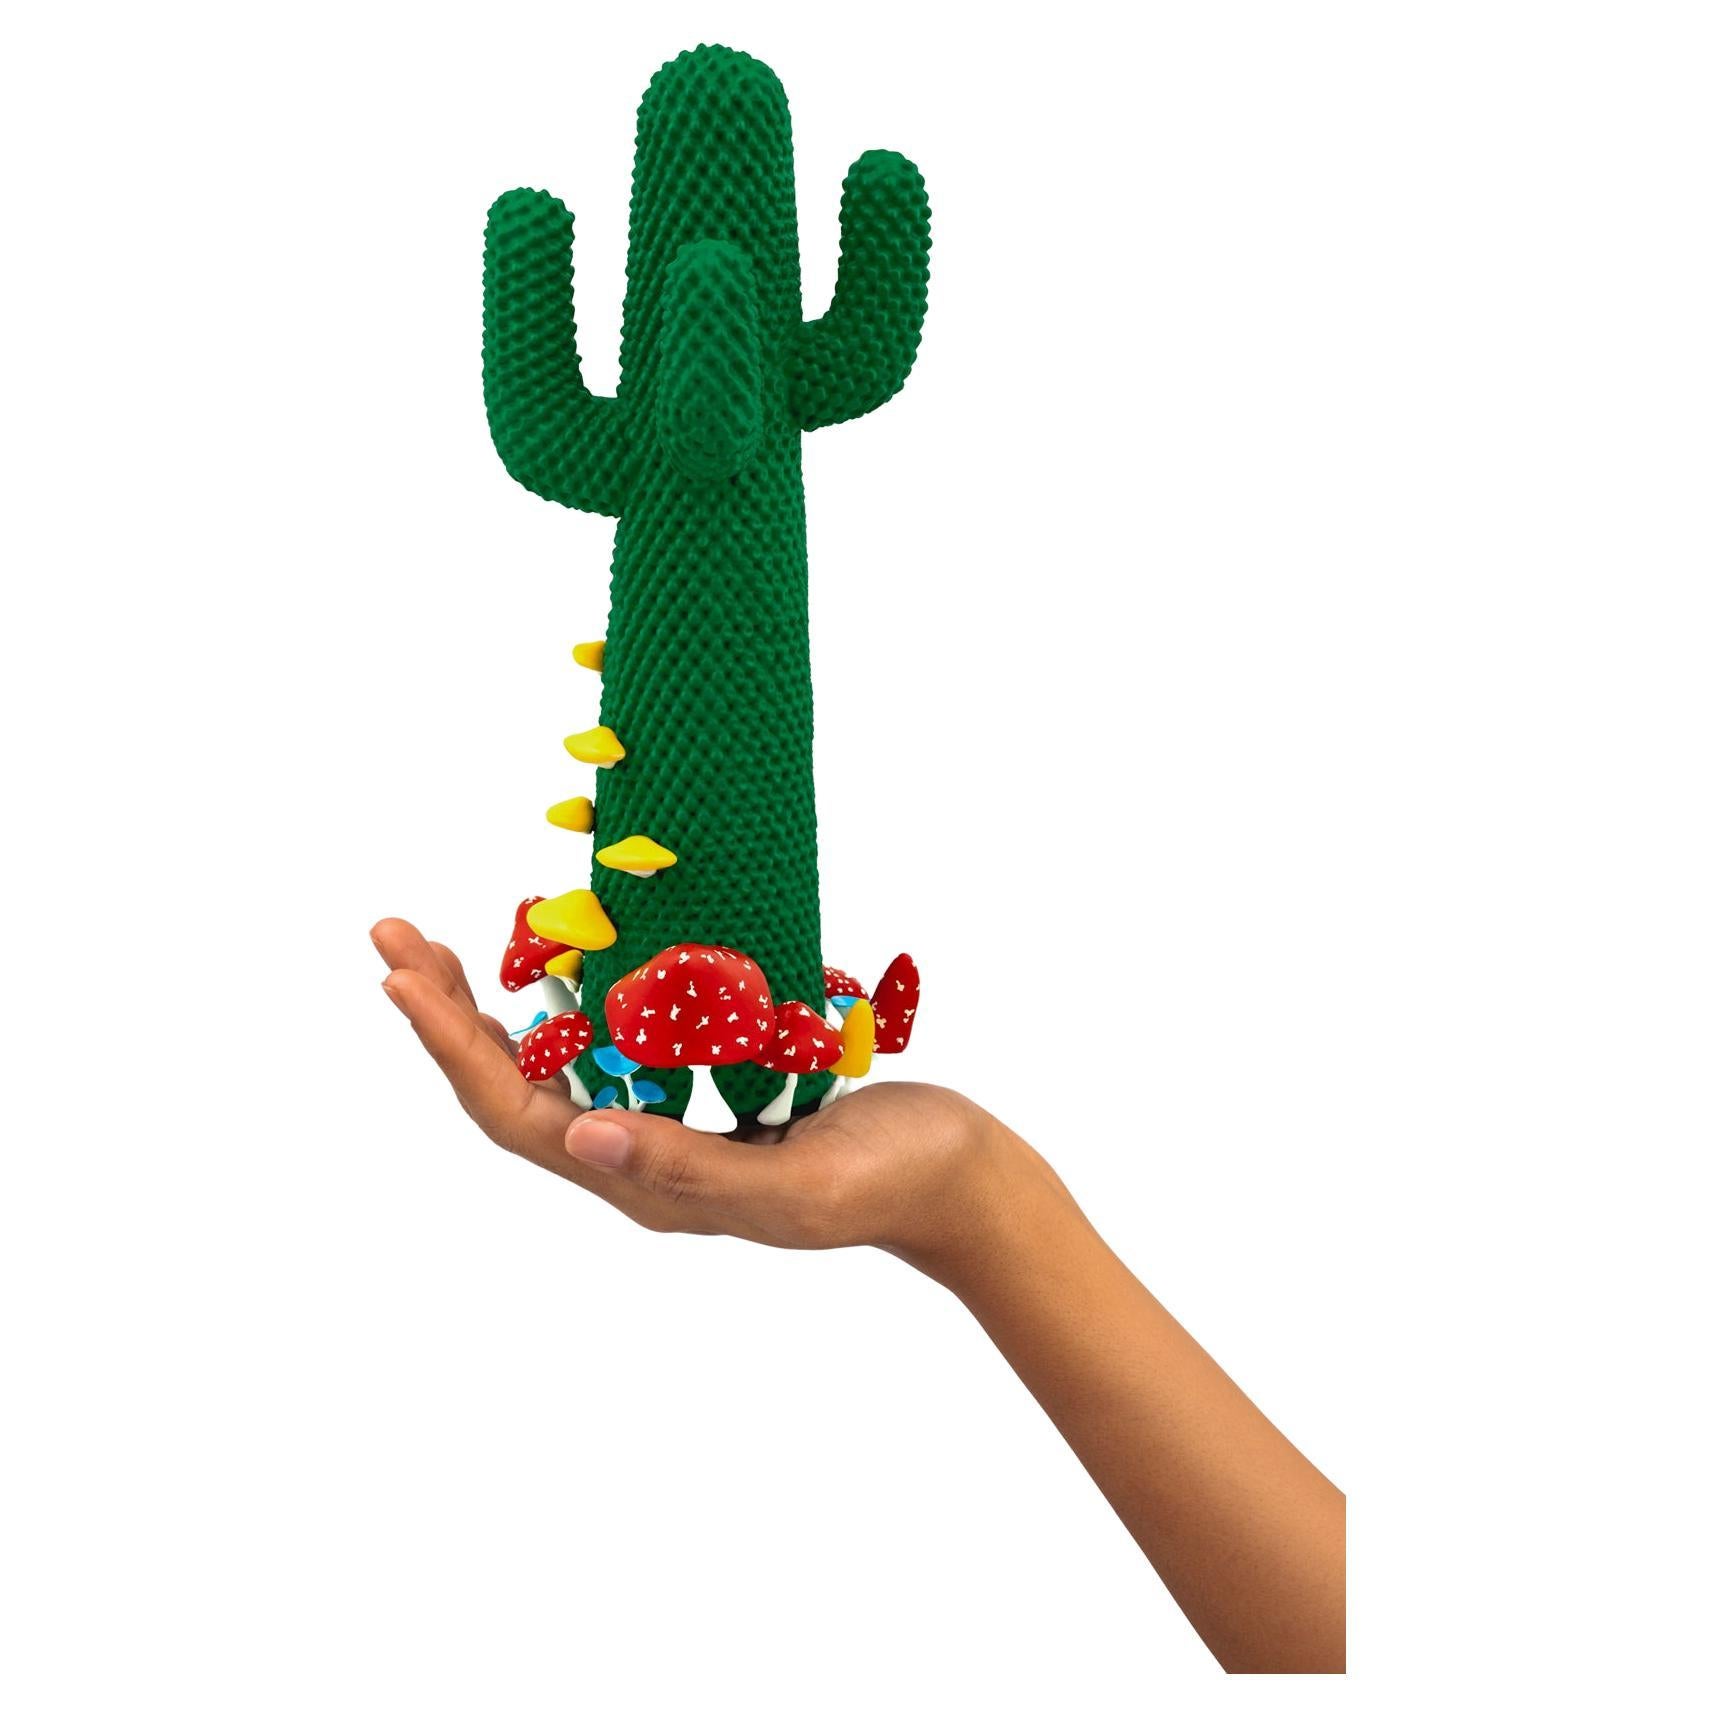 LIMITED EDITION #57/99

Gufram presents the miniaturised version of the Shroom CACTUS® created in collaboration with A$AP Rocky and the artist’s new design studio HOMMEMADE Exactly as the real-size Shroom CACTUS®, the new Guframini piece features